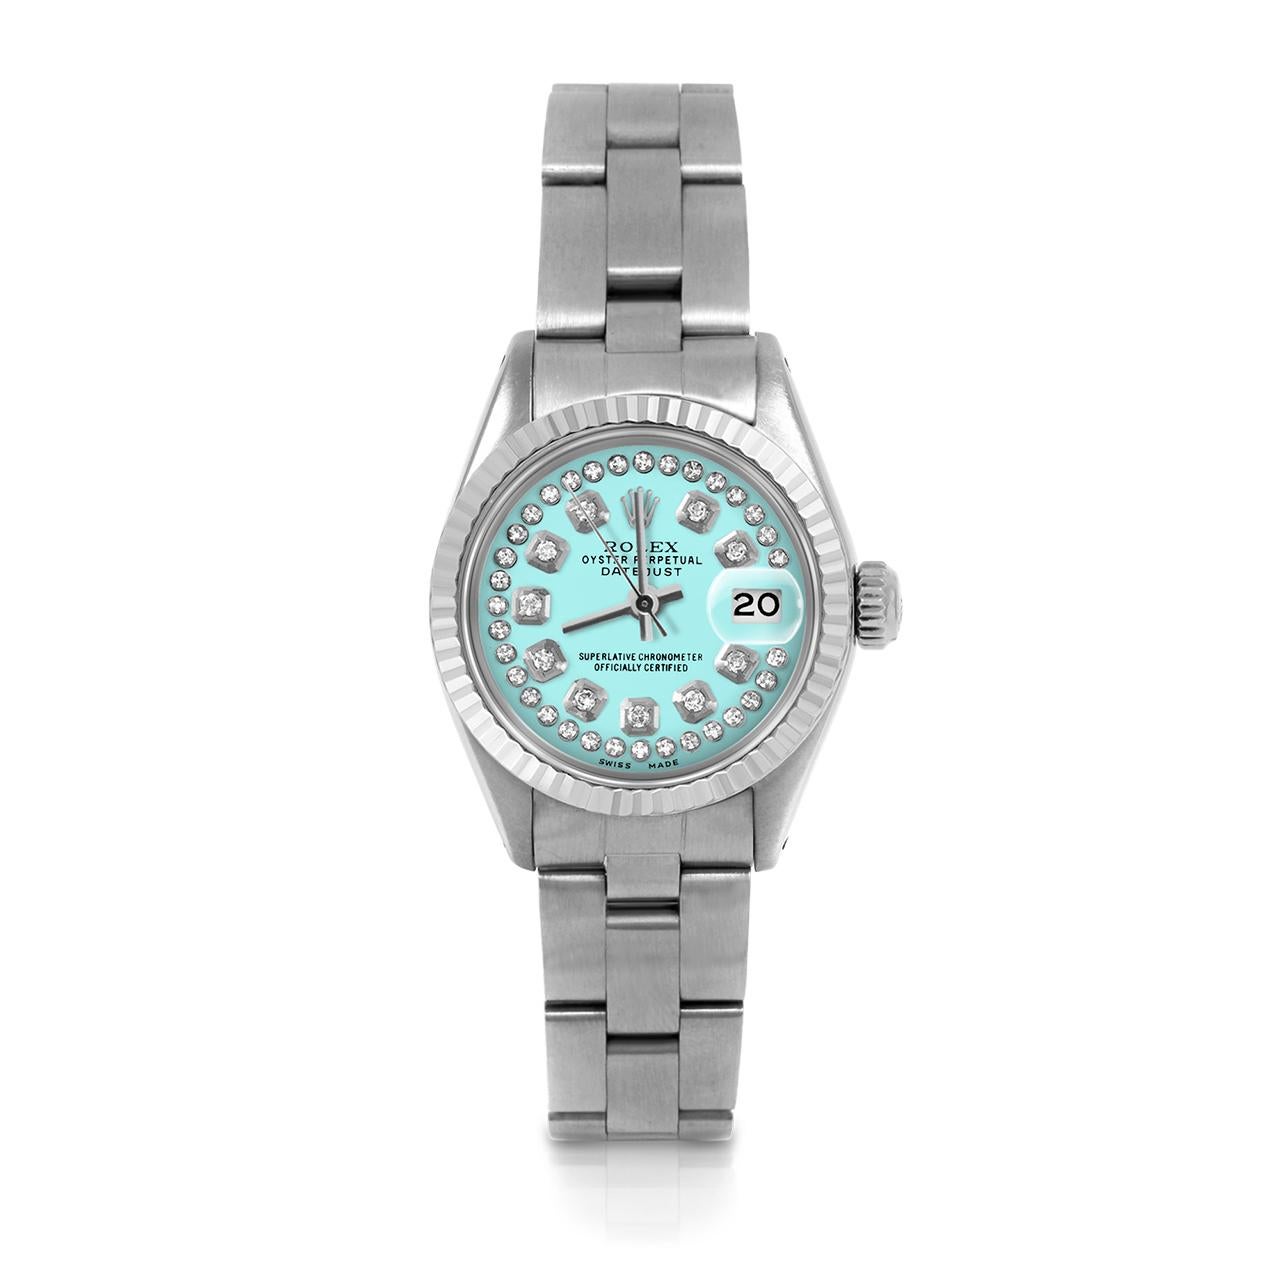 Pre-Owned Rolex 6917 Ladies 26mm Datejust Watch, Custom Turquoise String Diamond Dial & Fluted Bezel on Rolex Stainless Steel Oyster Band.   

SKU 6917-SS-TRQ-STRD-FLT-OYS


Brand/Model:        Rolex Datejust
Model Number:        6917
Style:       